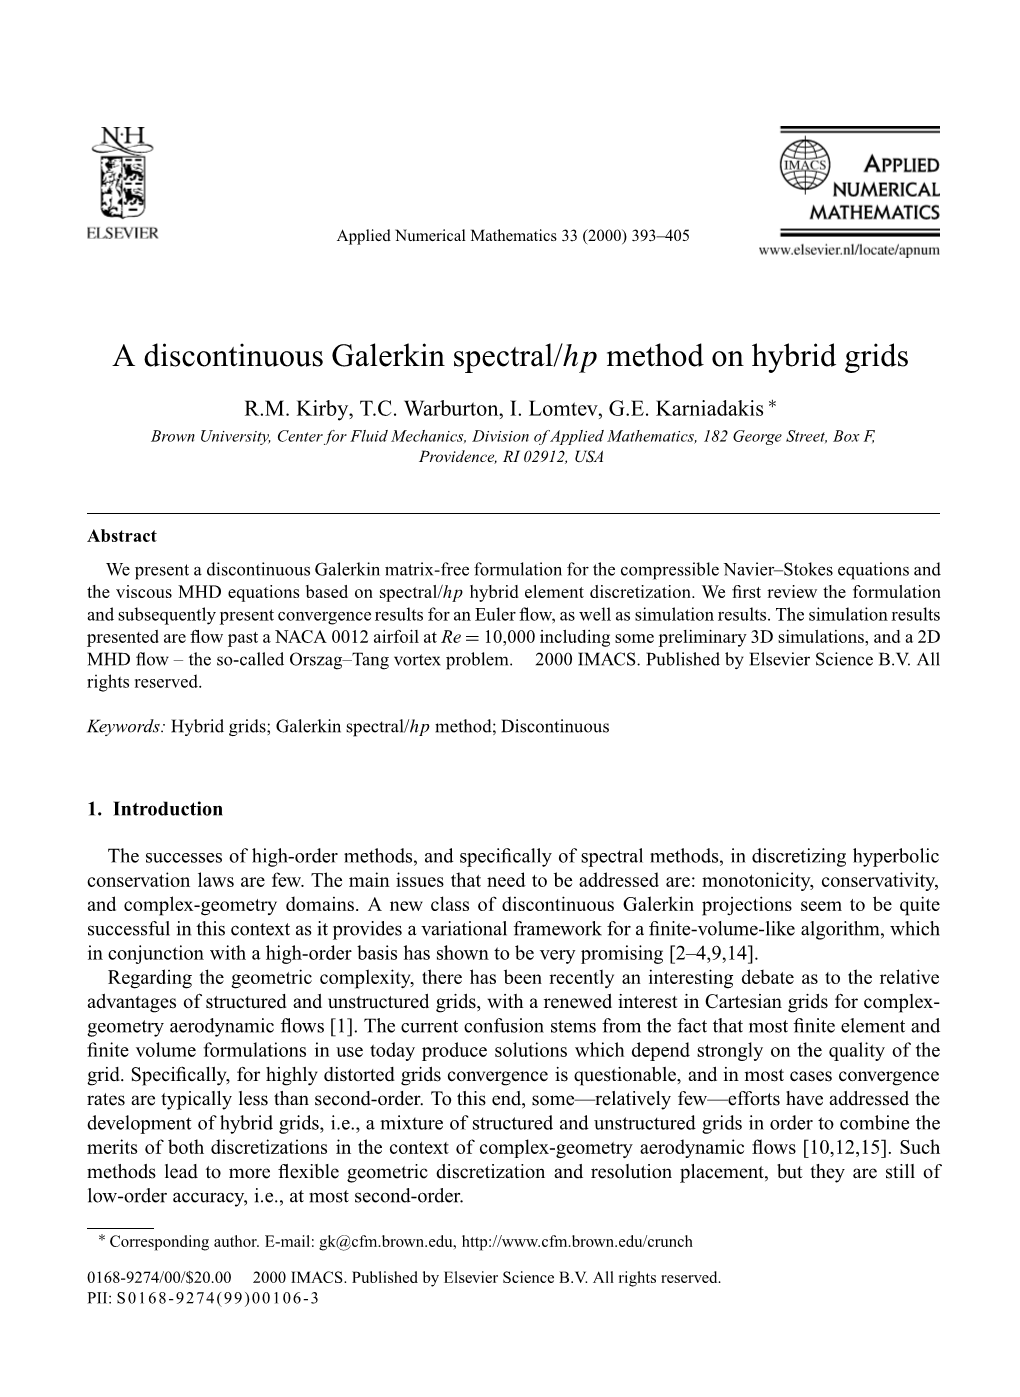 A Discontinuous Galerkin Spectral/Hp Method on Hybrid Grids